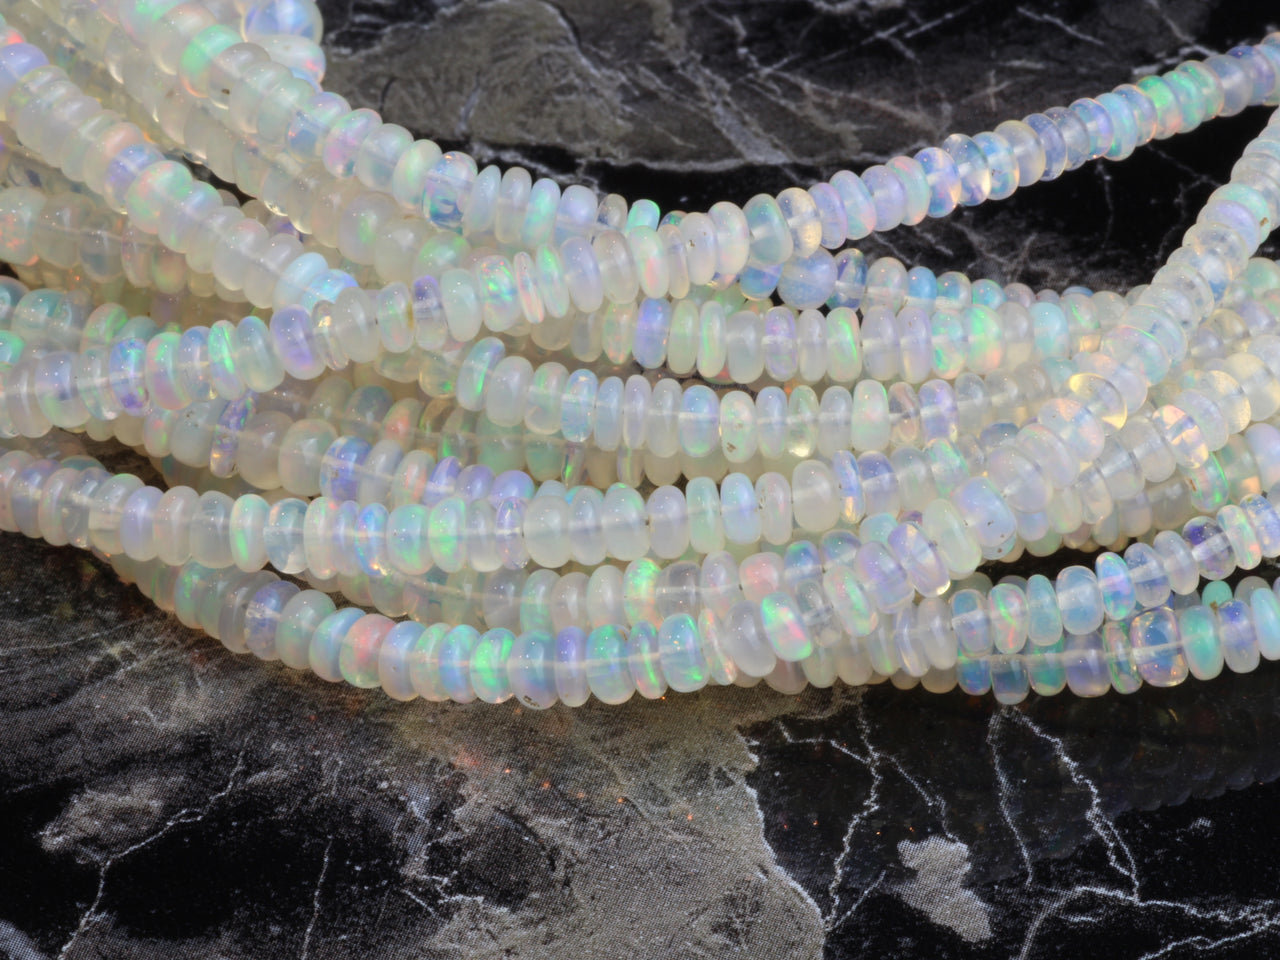 White Ethiopian Opal 3mm - 5mm Smooth Rondelles Bead Strand